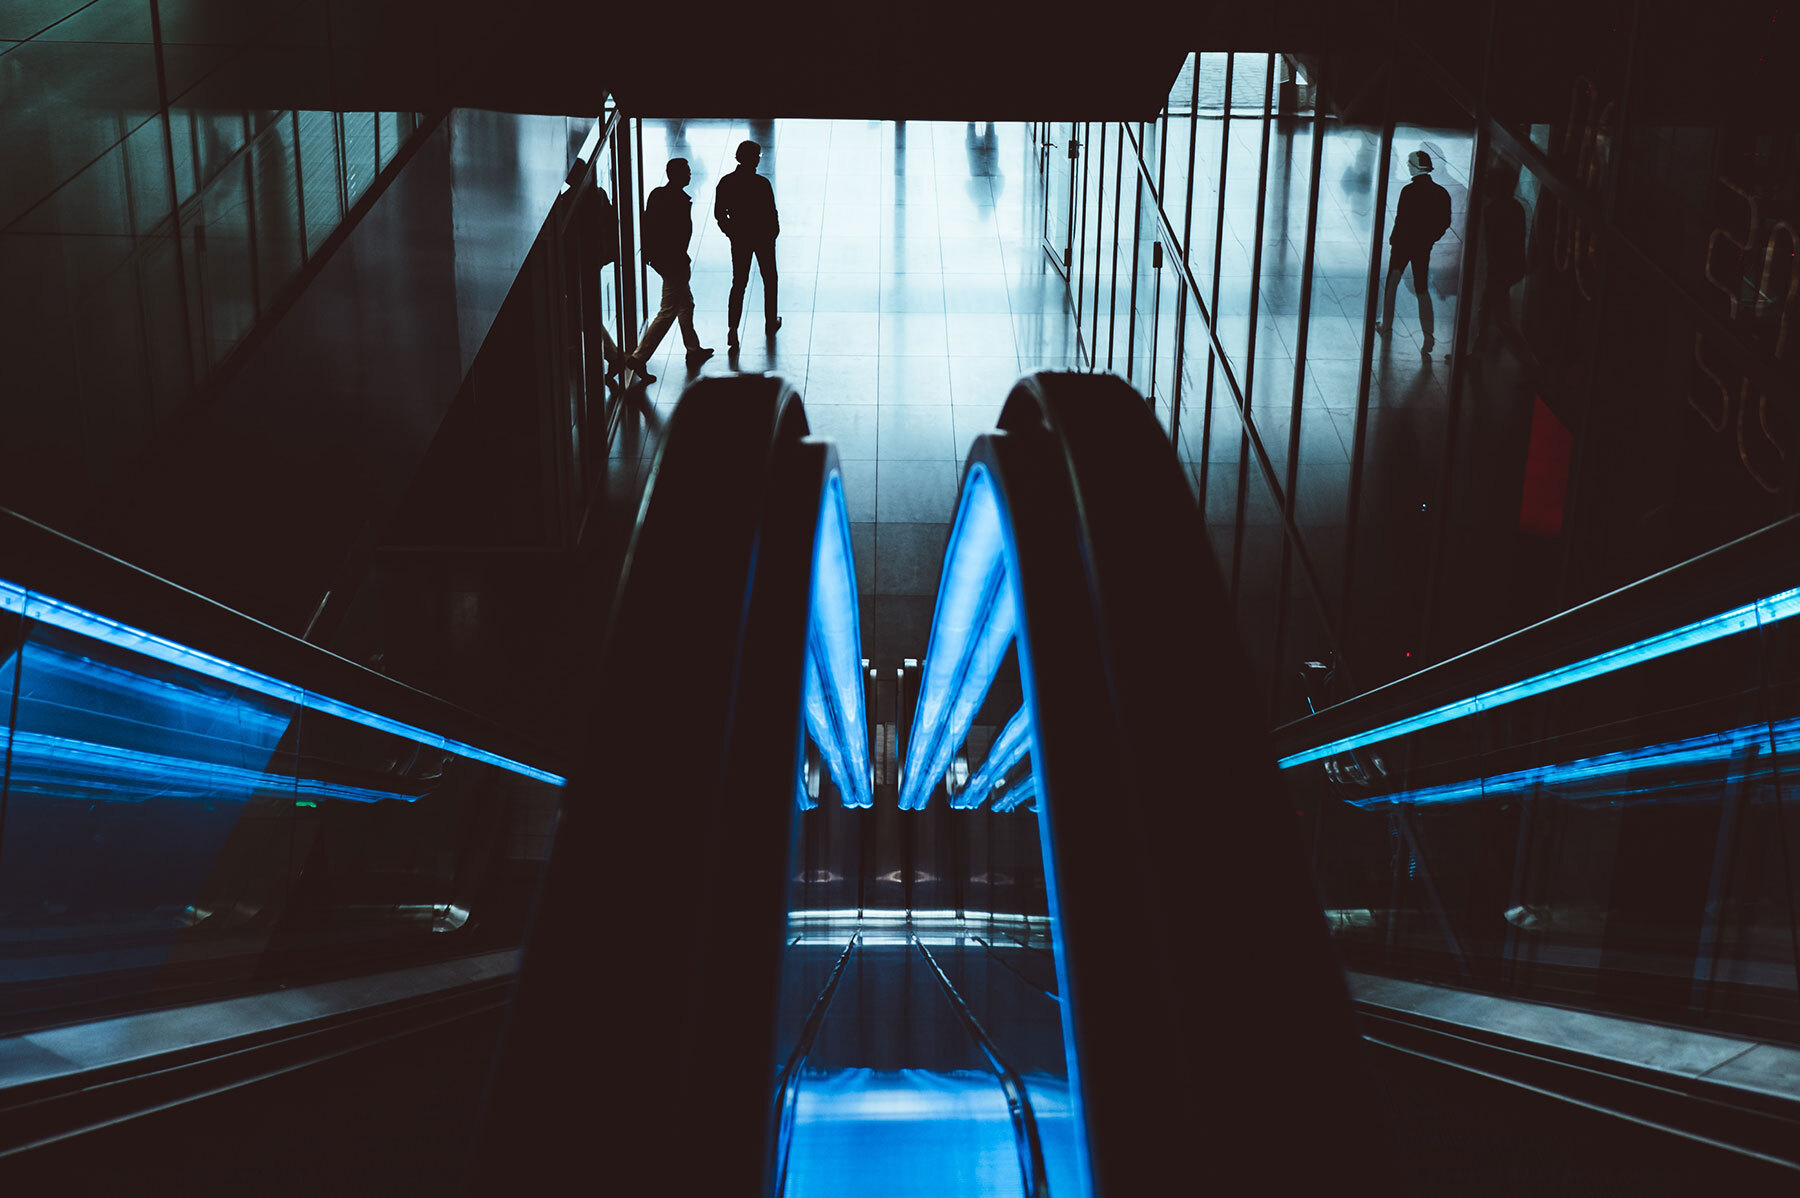 Escalator going down with silhouette of people in the background